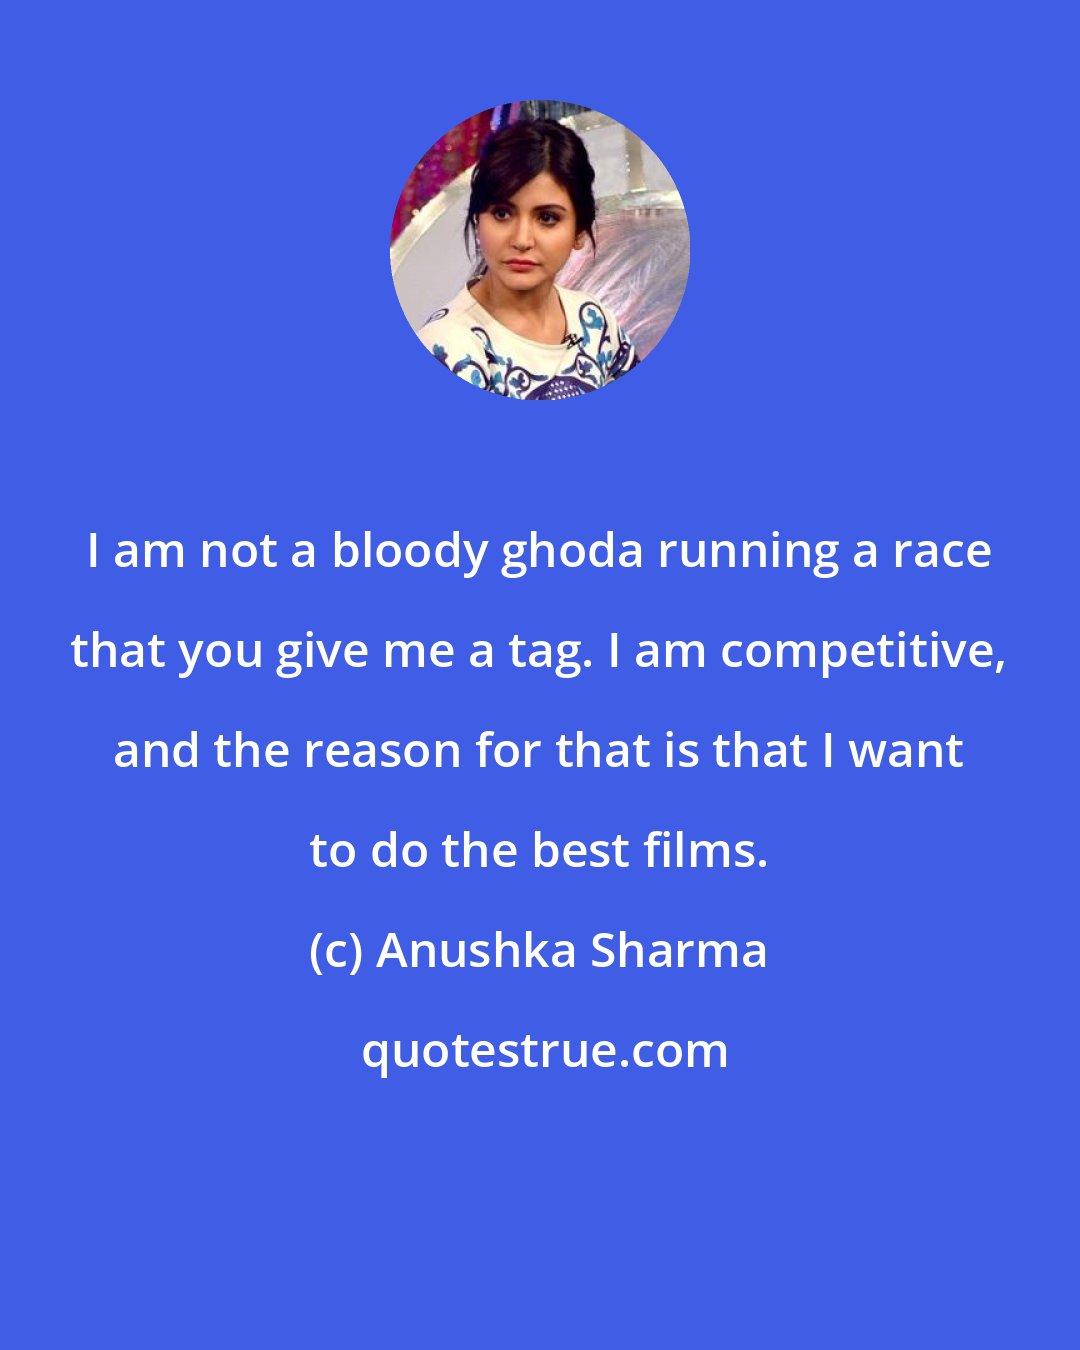 Anushka Sharma: I am not a bloody ghoda running a race that you give me a tag. I am competitive, and the reason for that is that I want to do the best films.